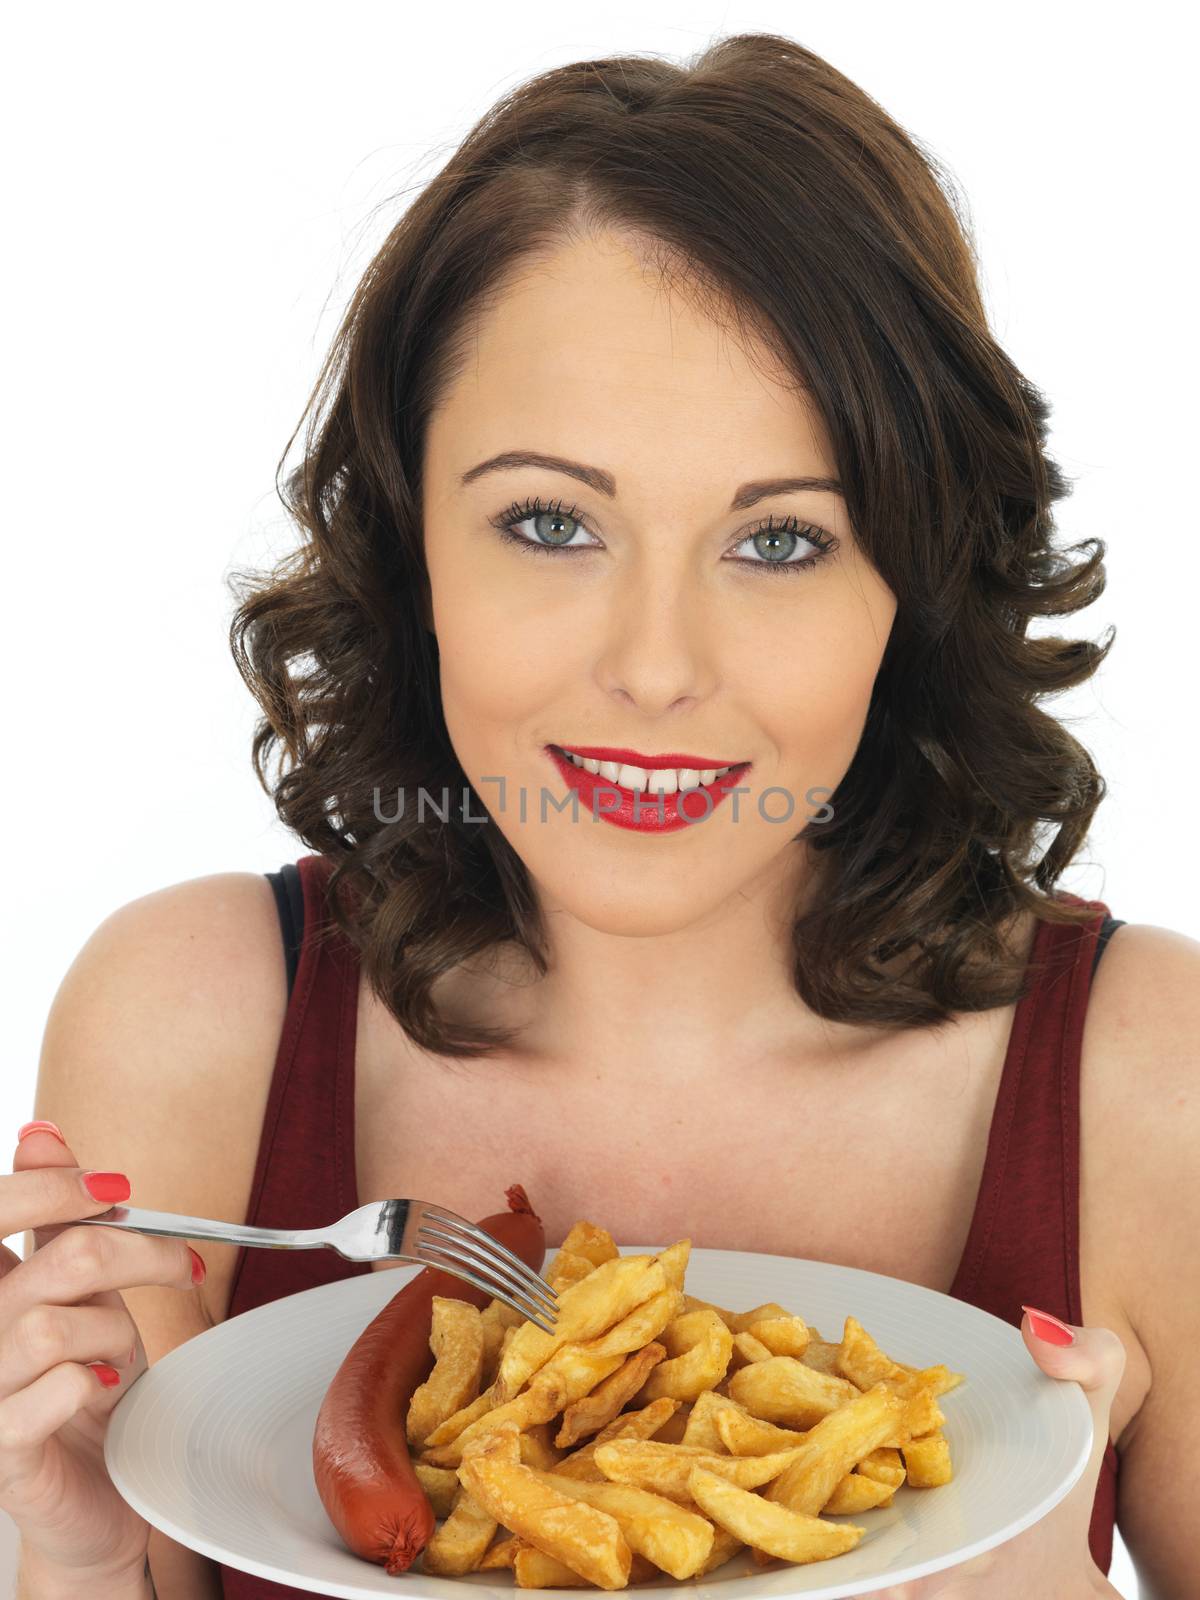 Young Woman Eating Saveloy Sausage with Chips by Whiteboxmedia